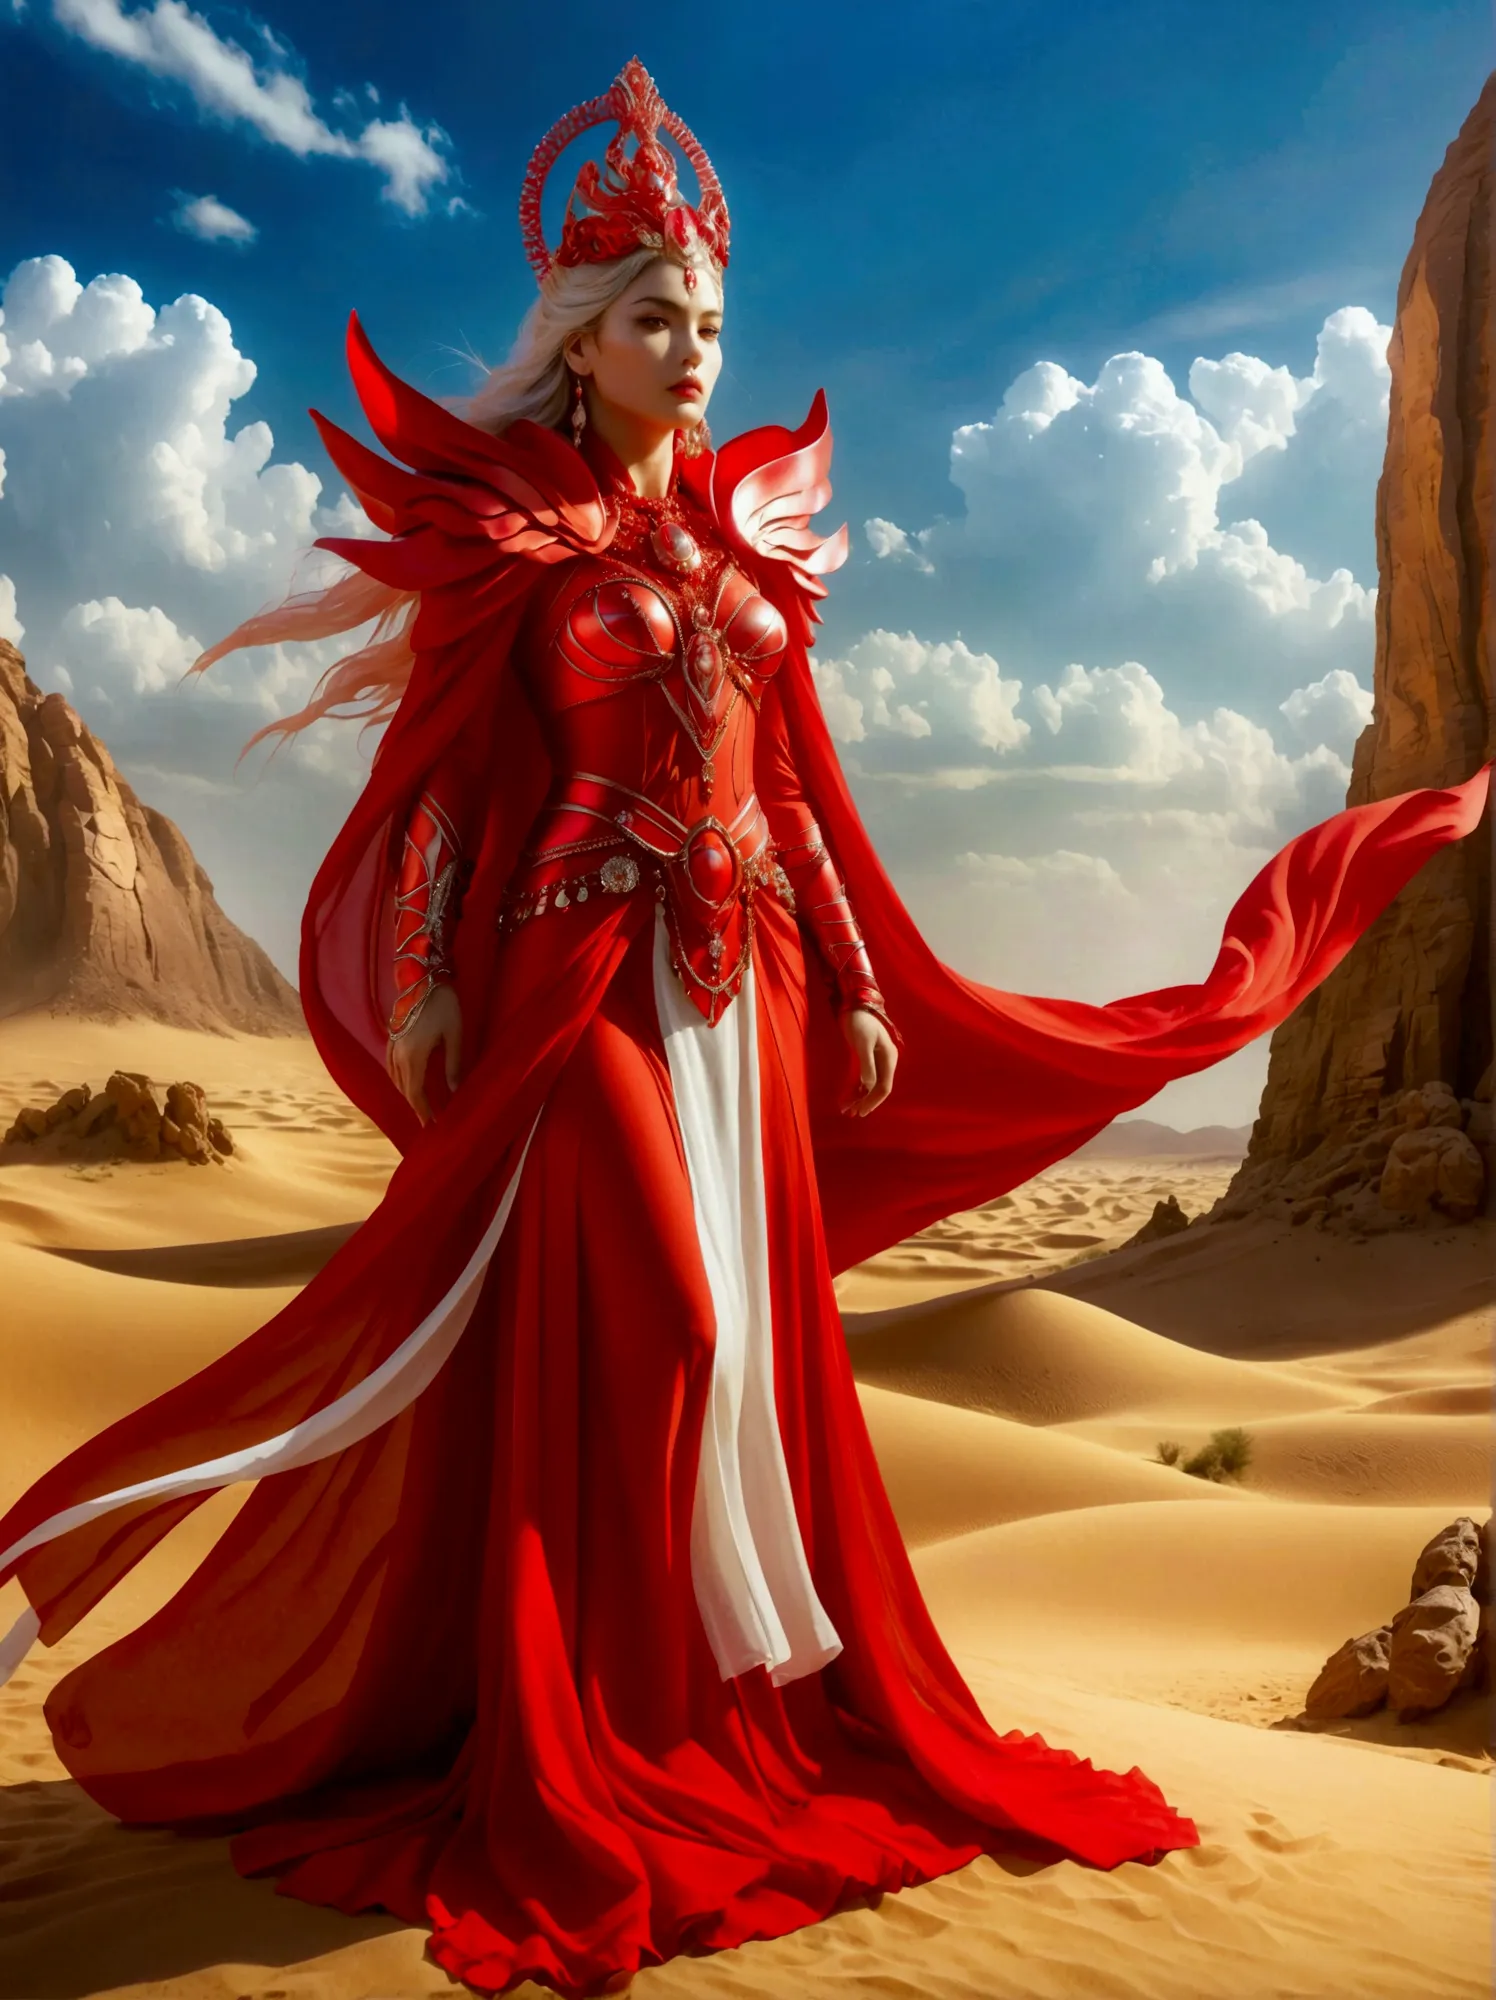 A mysterious desert princess dressed in bright red rules a dystopian desert kingdom，This ruthless figure sits on a massive thron...